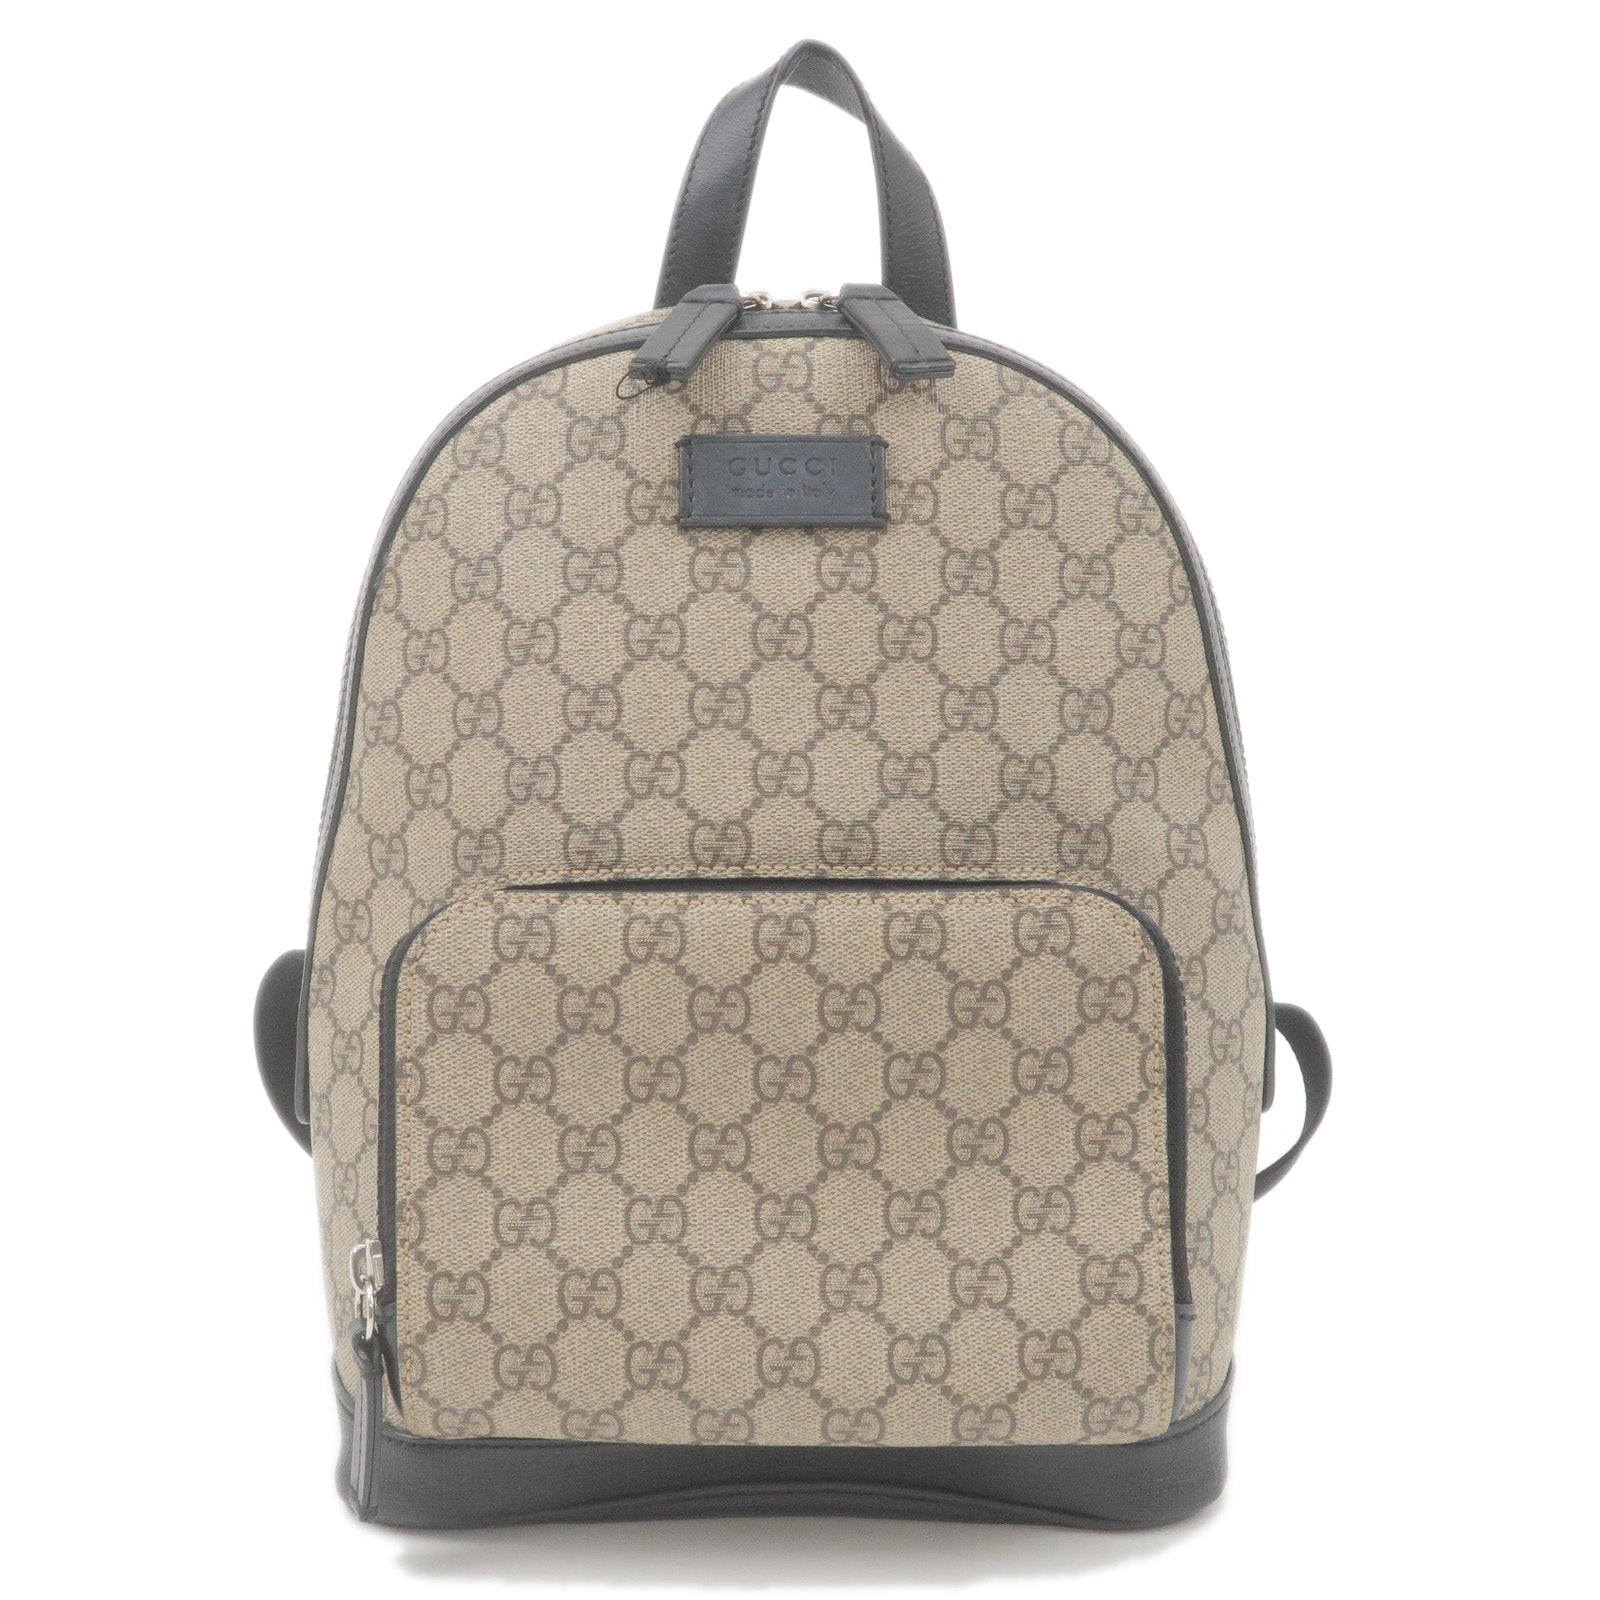 GUCCI-GG-Supreme-Leather-Small-Back-Pack-Beige-Black-429020